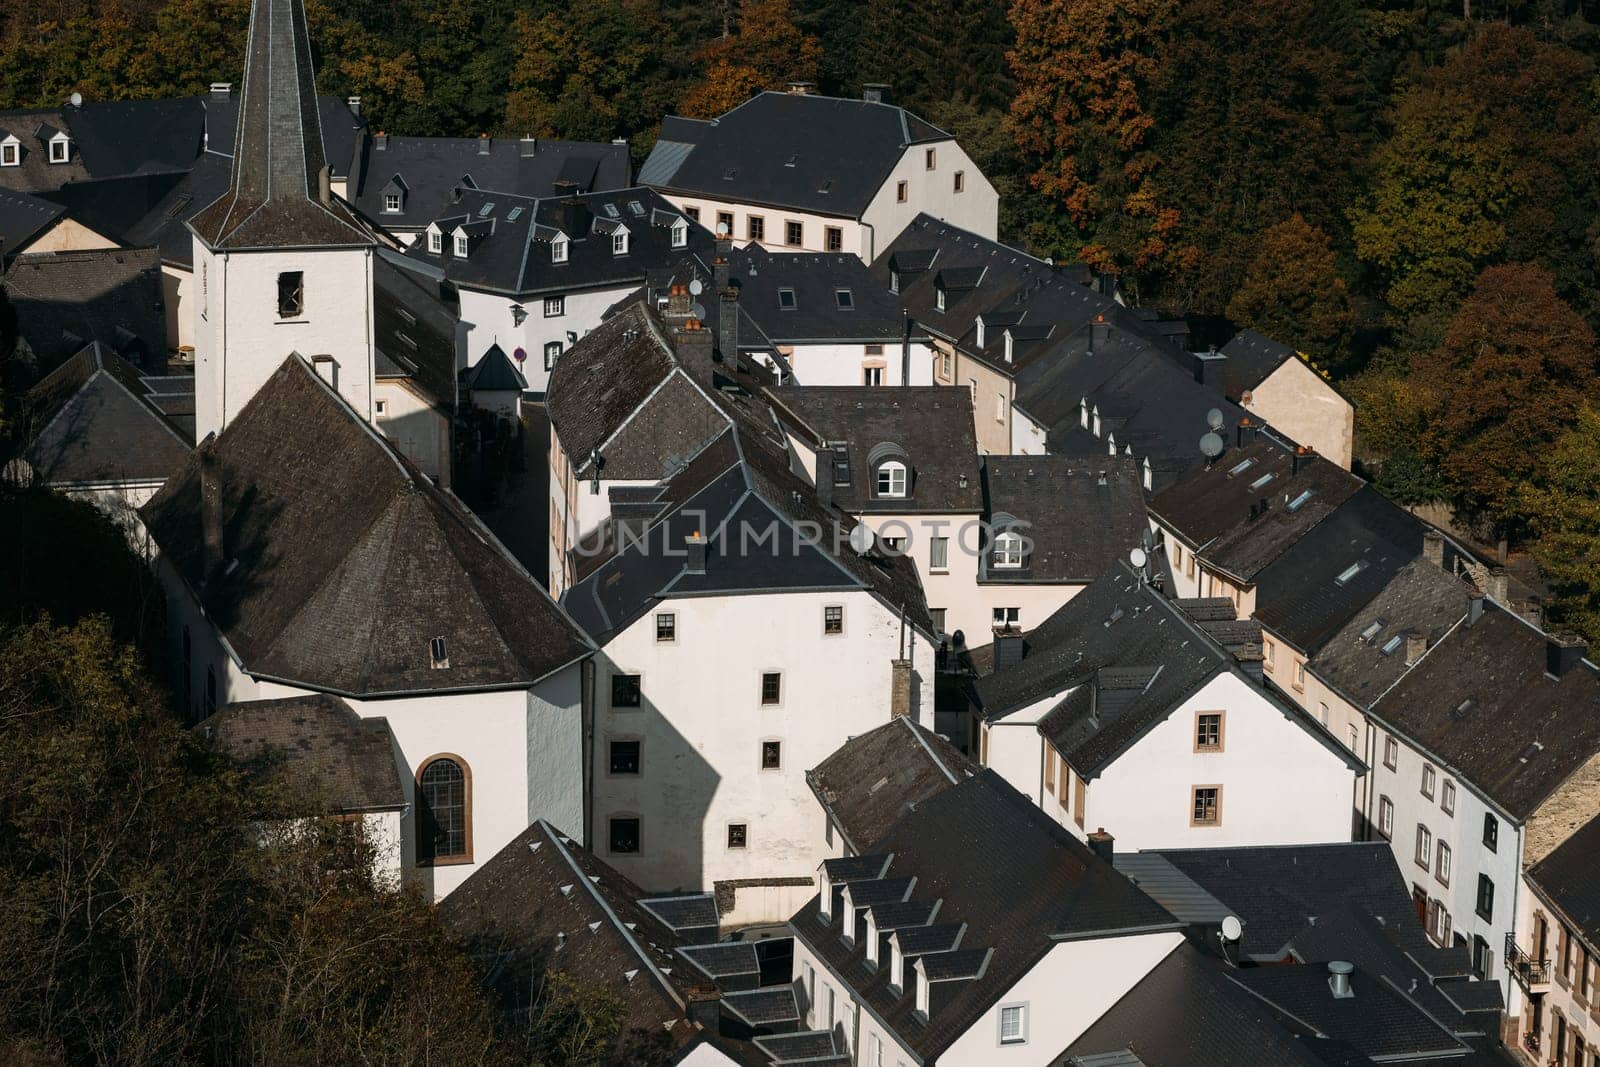 Ancient town in Luxemburg with identical houses with white facades and dark roofs. Small town with similar architecture located among forest